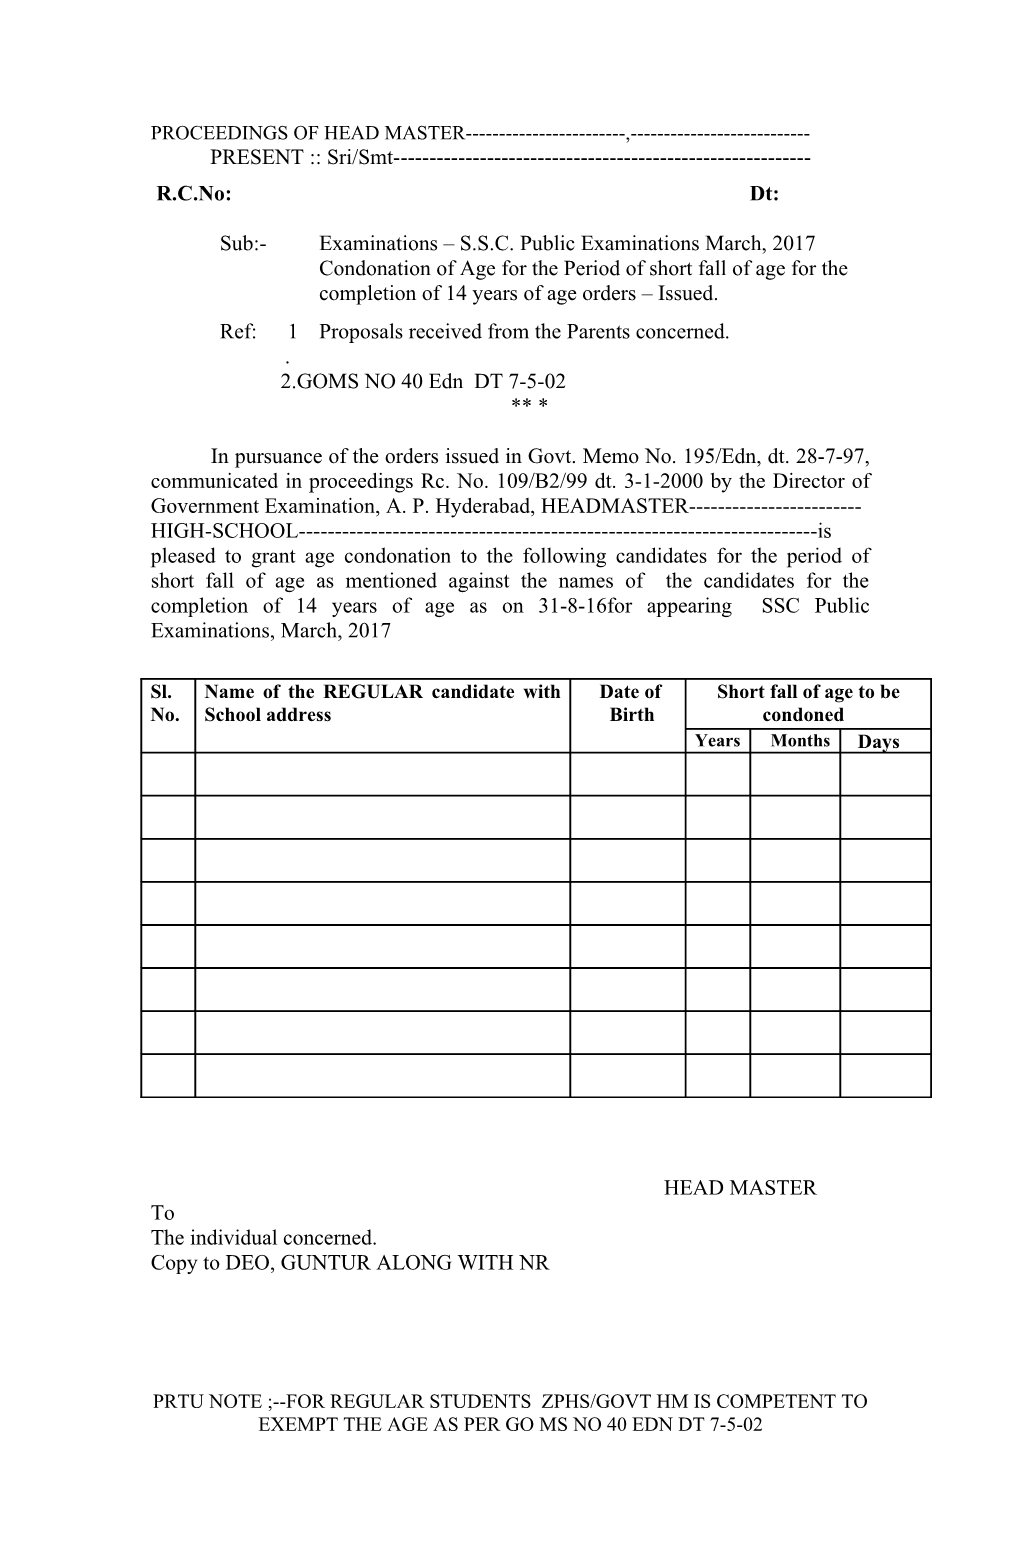 Proceedings of the District Educational Officer Chittoor